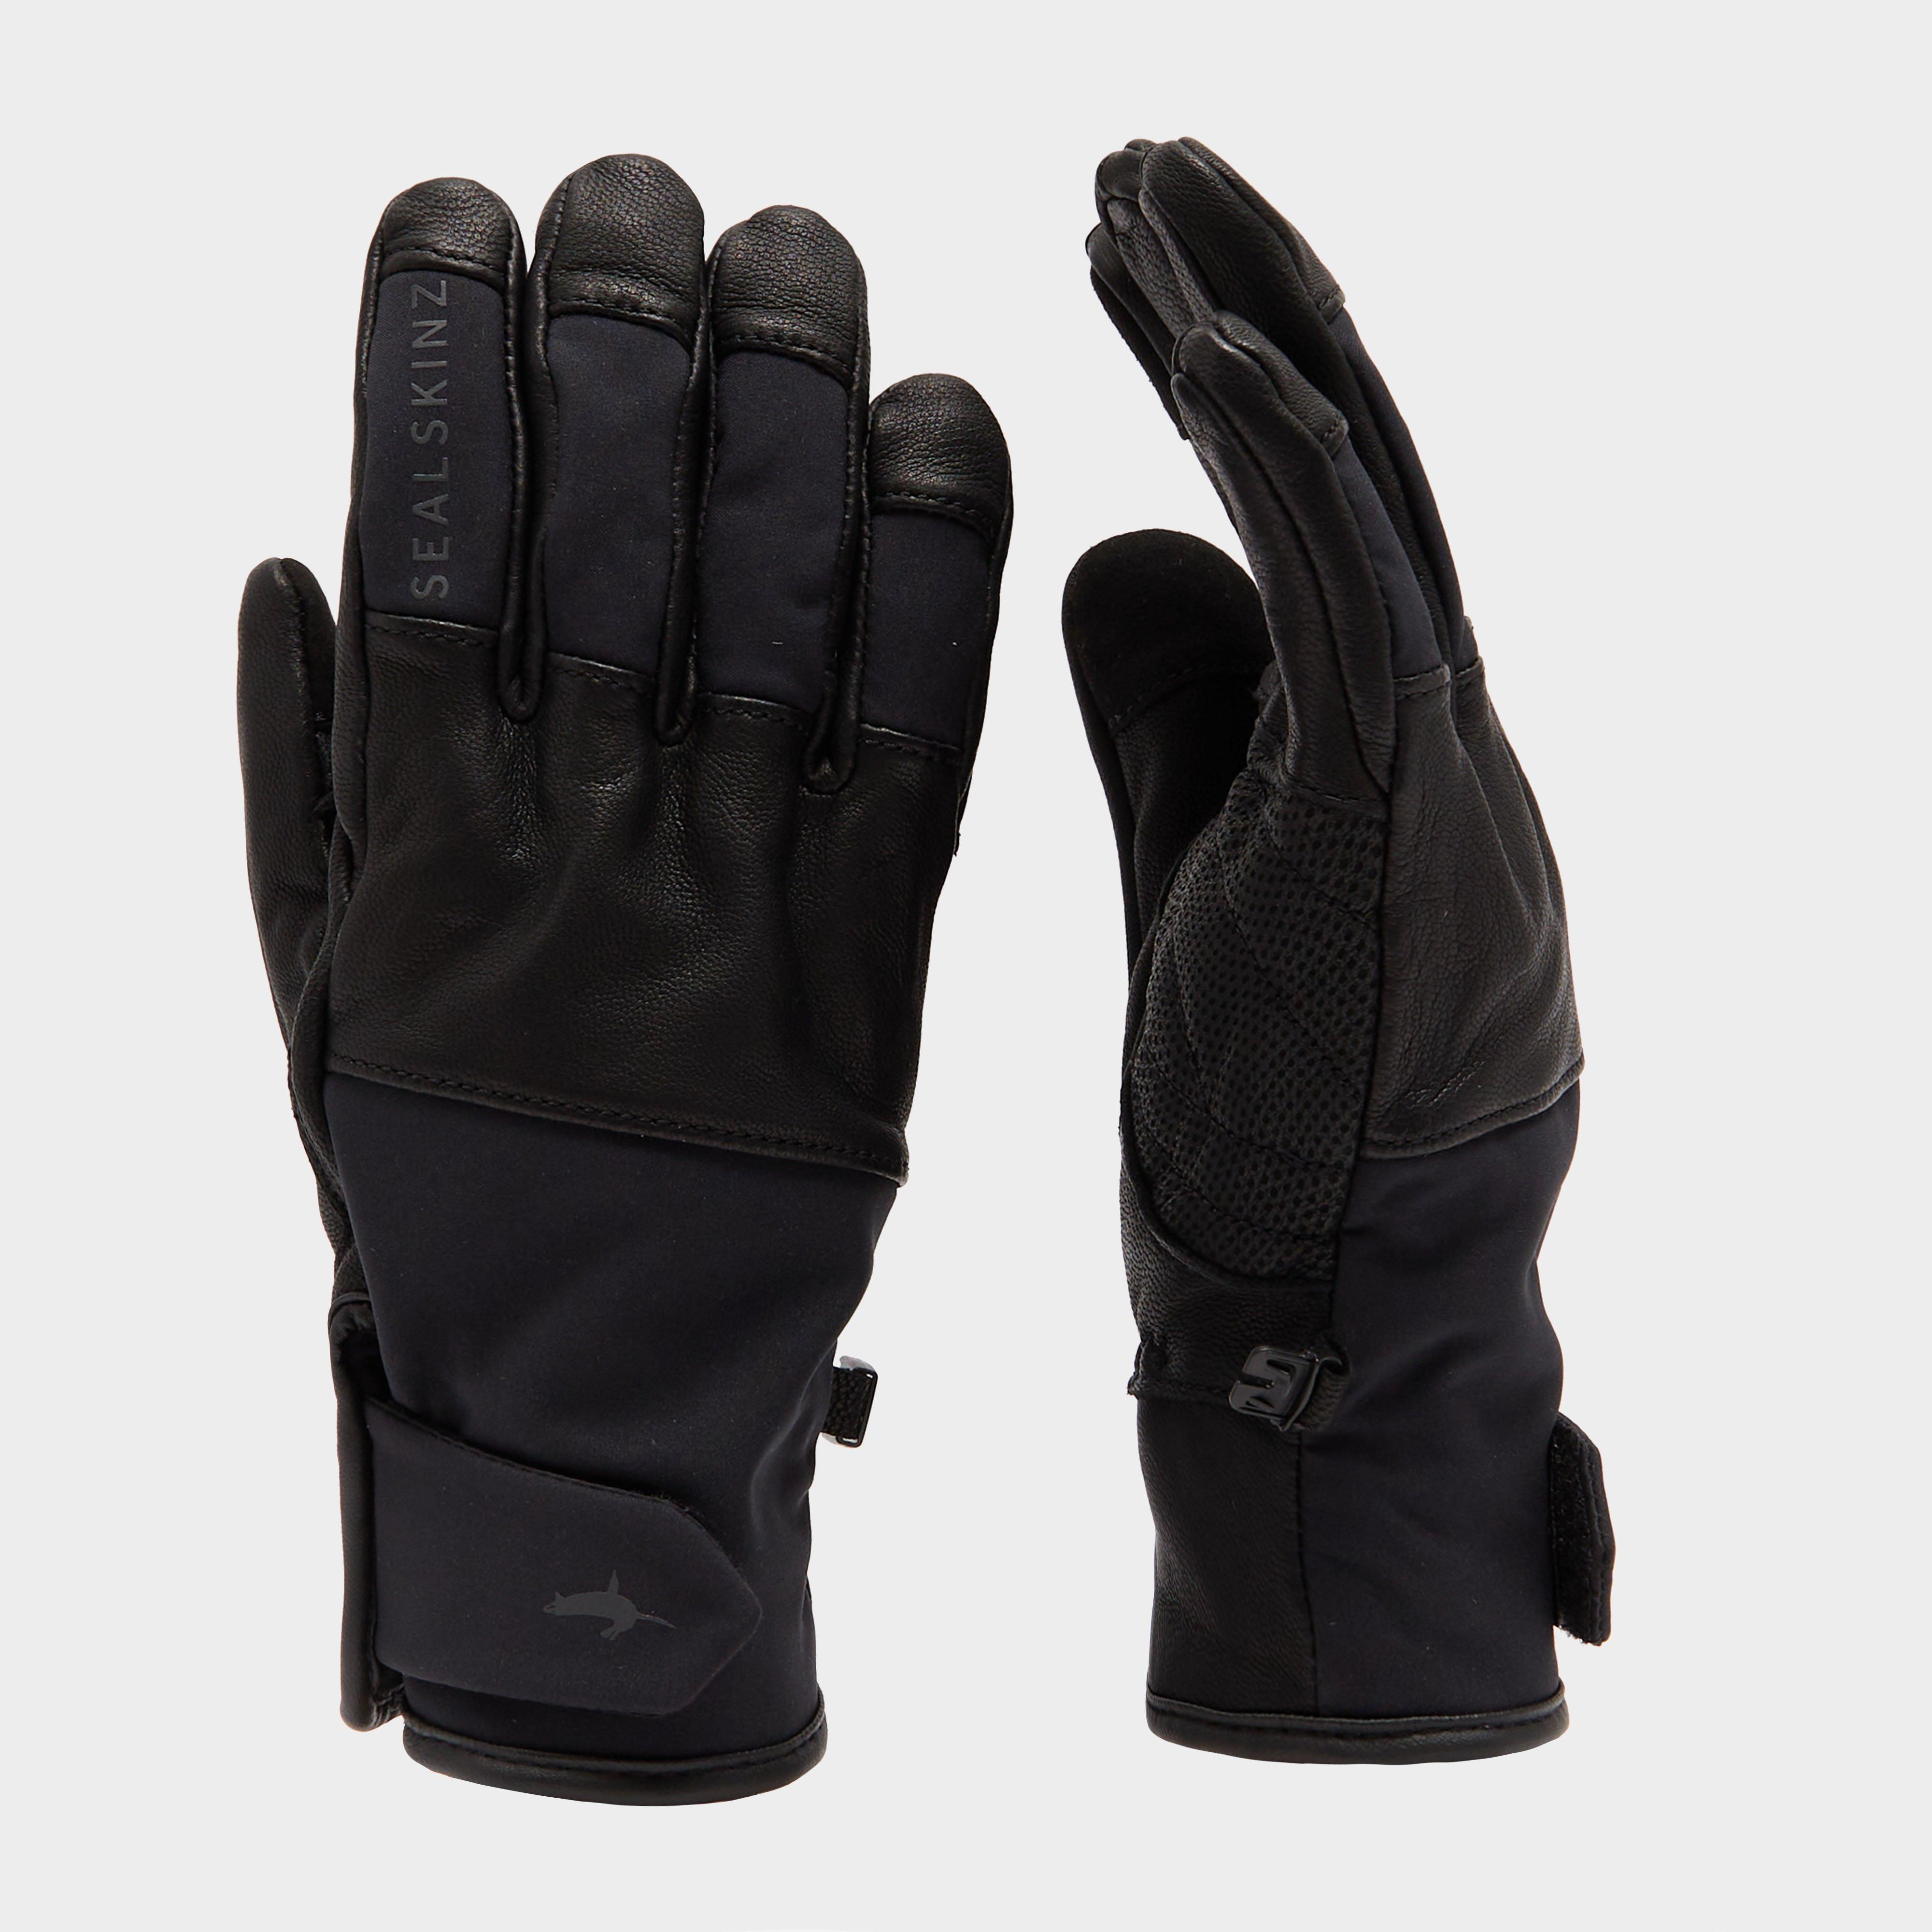 Sealskinz Waterproof Cold Weather Glove With Fusion Control - Black/gl  Black/gl